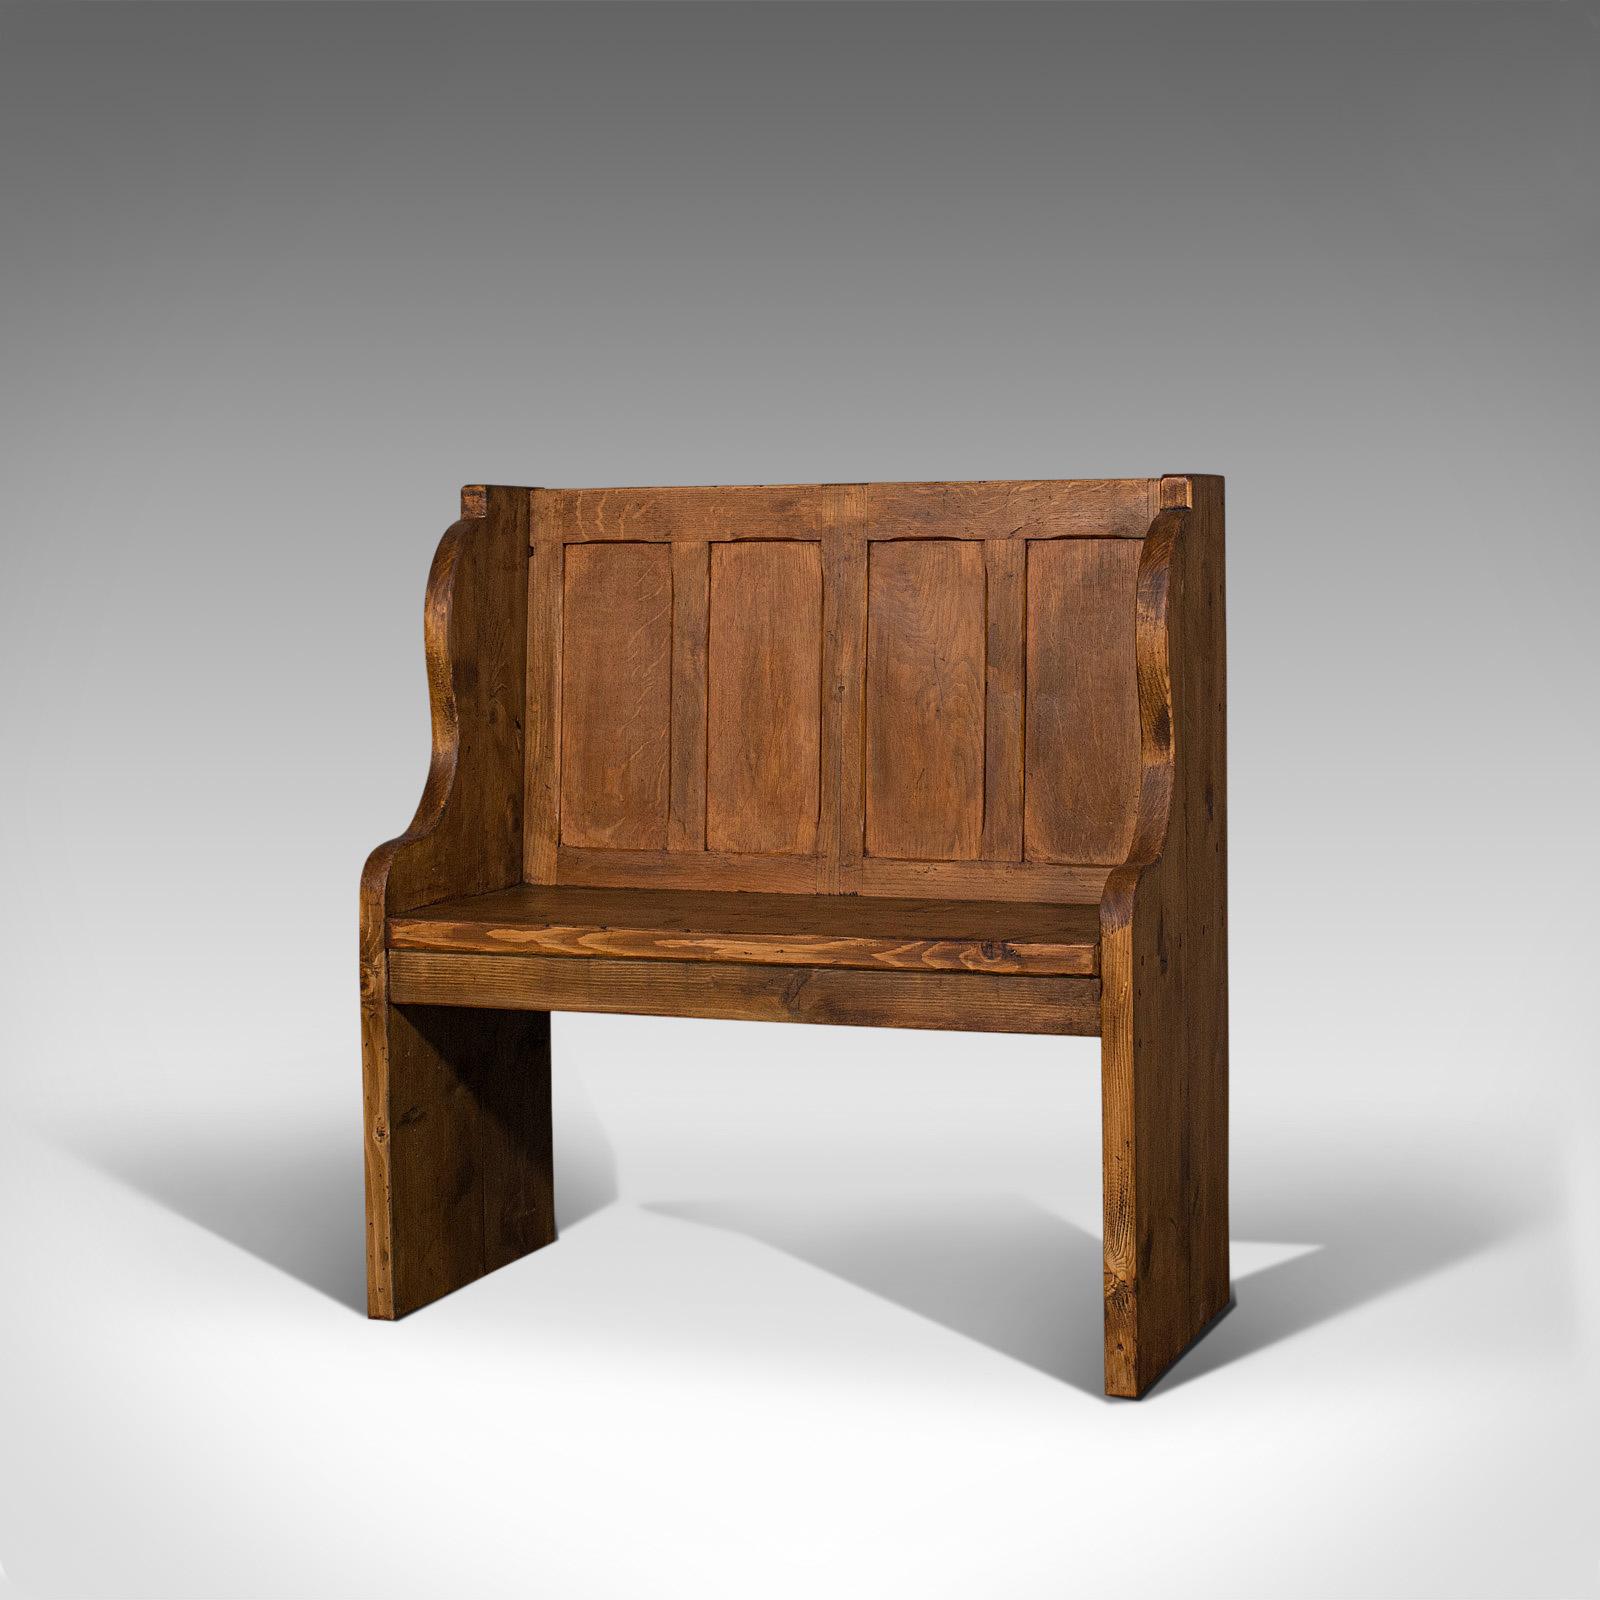 British Antique Two Seat Settle, English, Oak, Pine, Ecclesiastic, Pew, Bench, Victorian